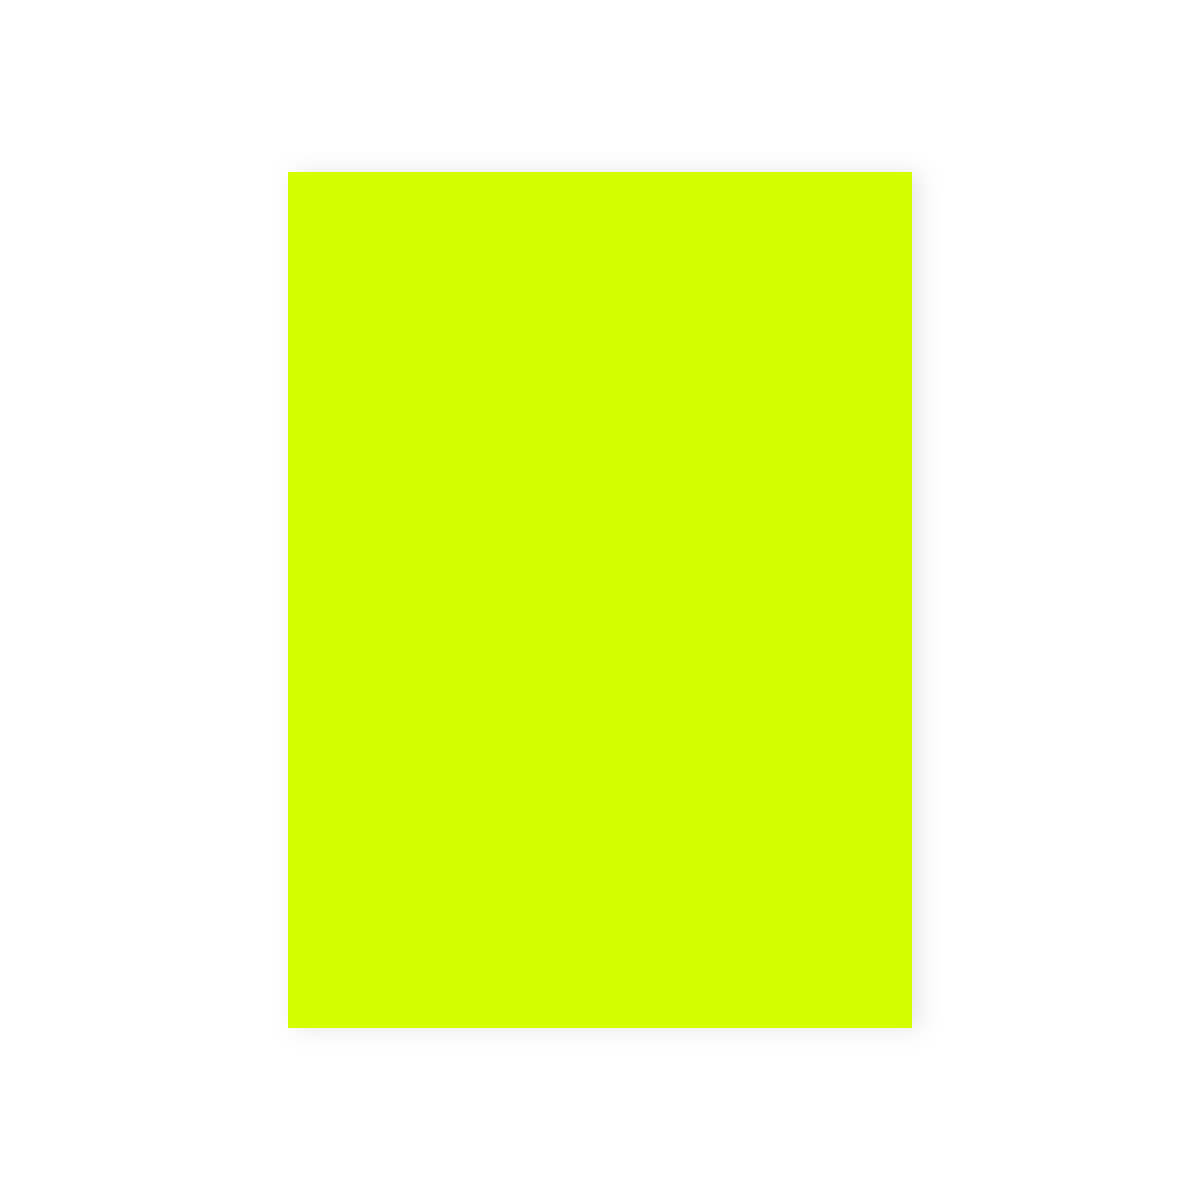 https://res.cloudinary.com/env-imgs/images/f_auto/shopimages/products/1200/neon-yellow-card/.jpg